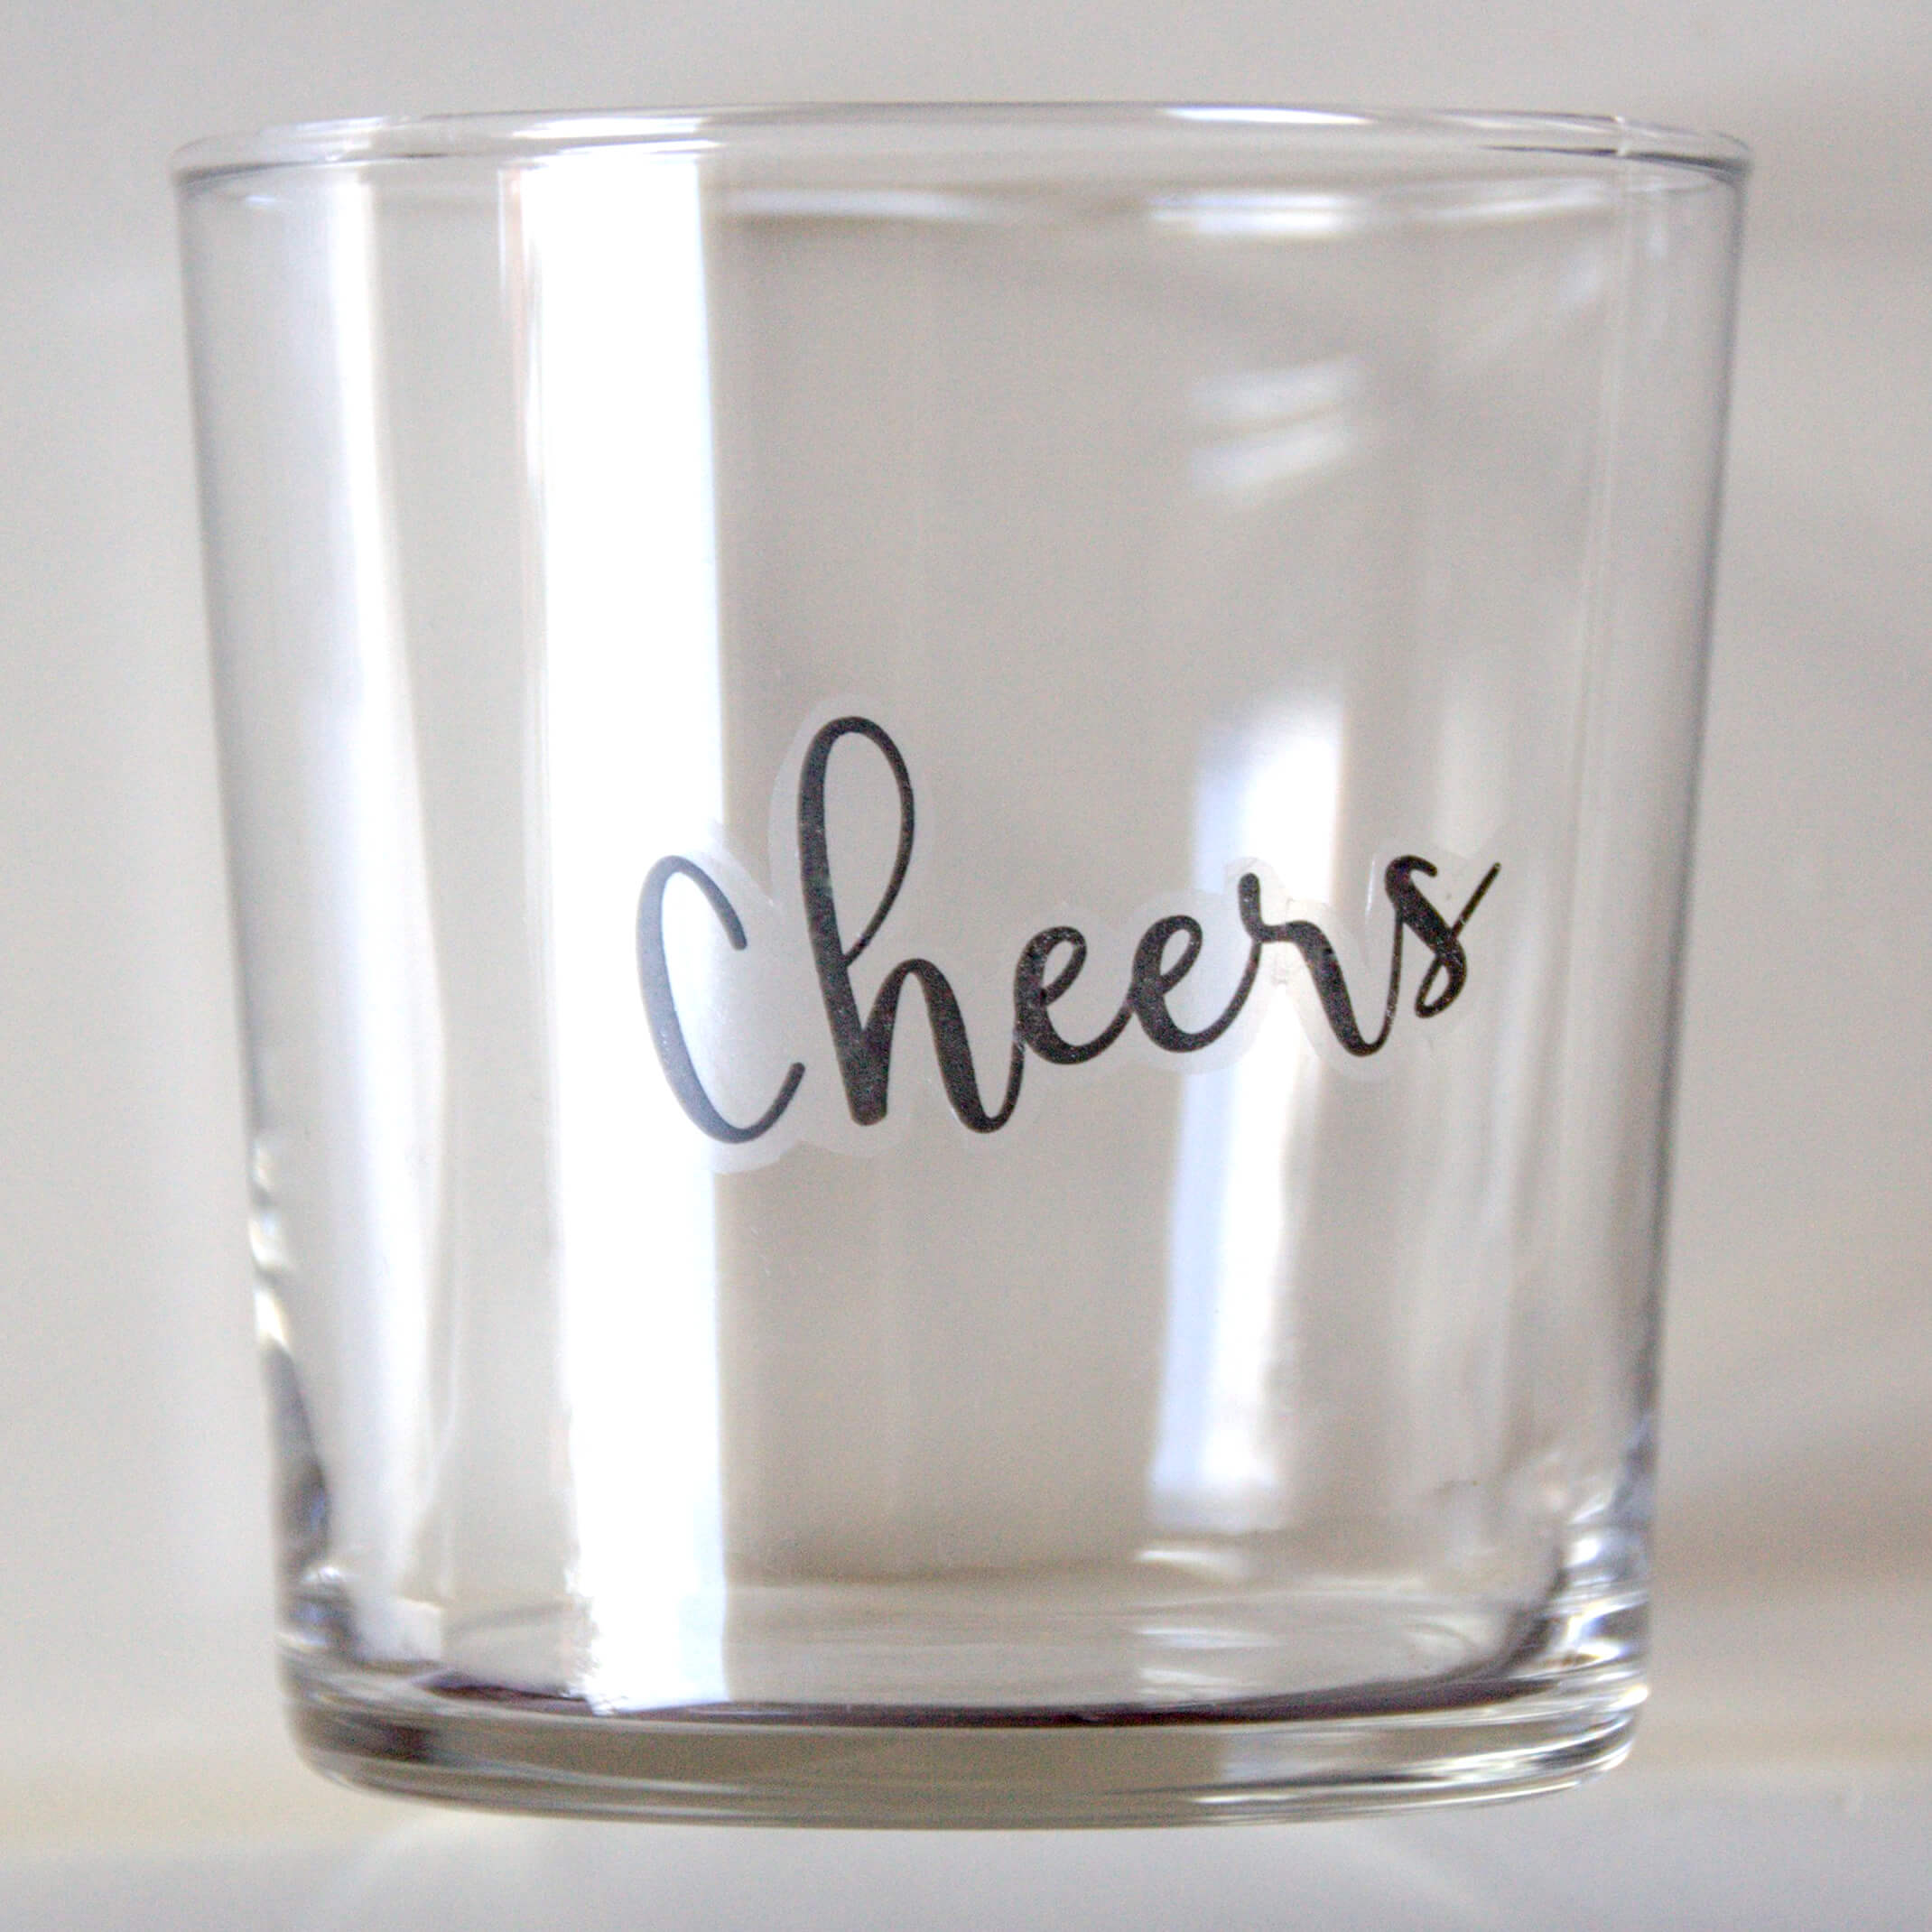 DIY water slide film on glass and porcelain Cheers